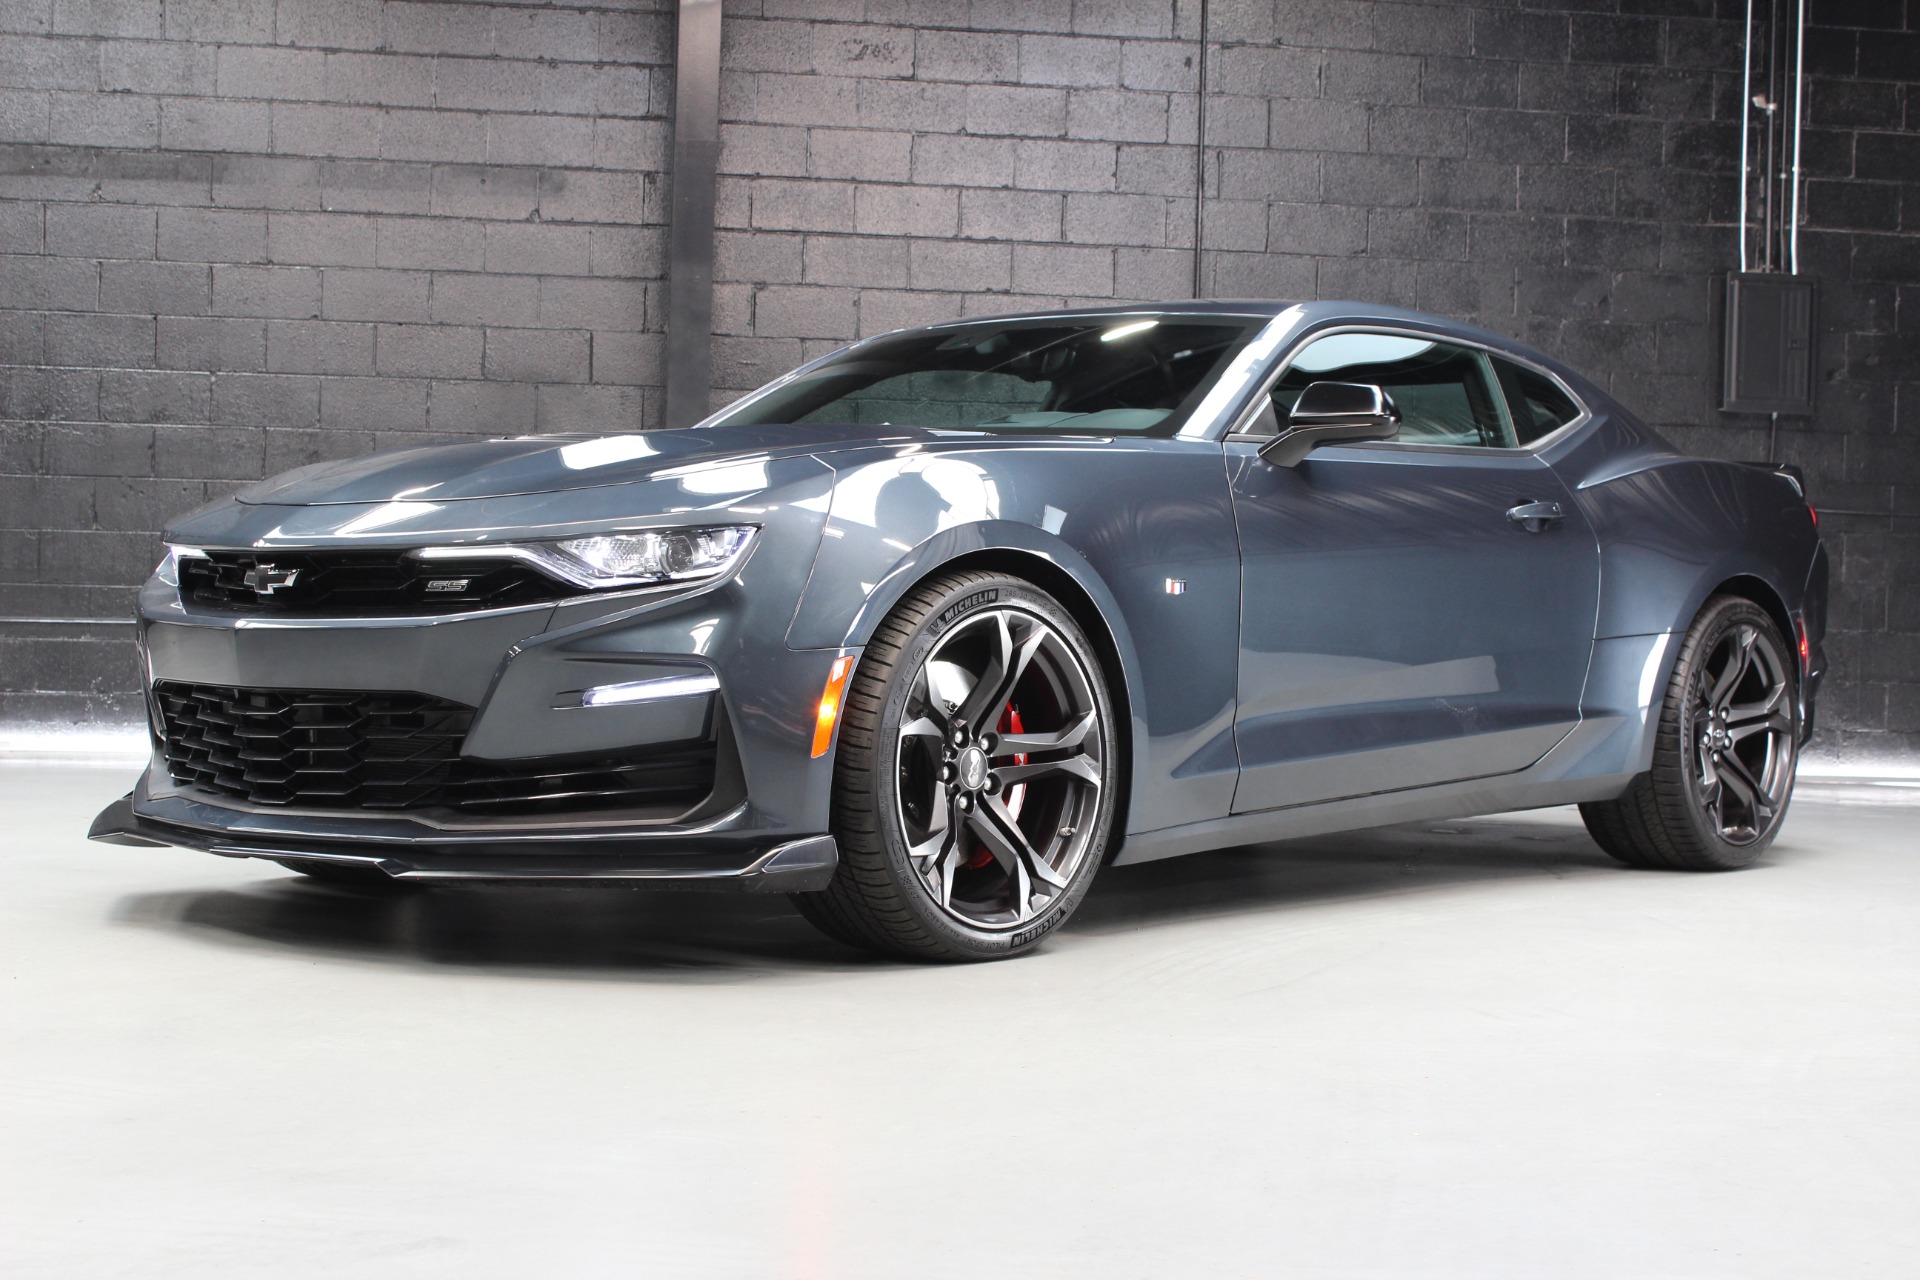 Used 2021 Chevrolet Camaro SS 1LE TRACK PERFORMANCE PACKAGE For Sale (Sold)  | Momentum Motorcars Inc Stock #132367